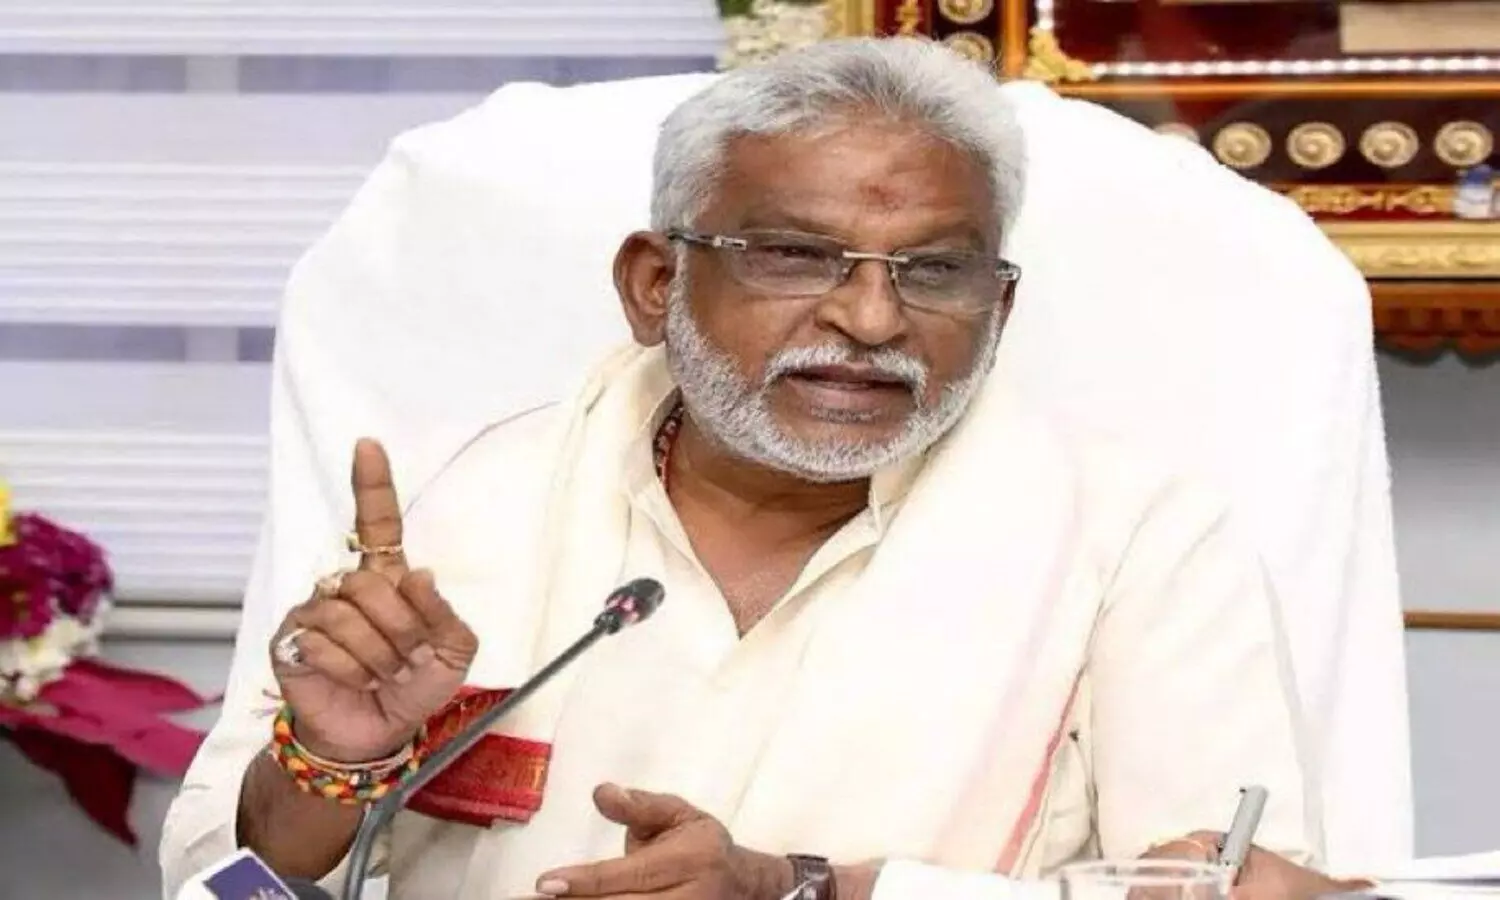 YV Subba Reddy’s sensational demand to continue Hyderabad as common capital until Vizag is ready